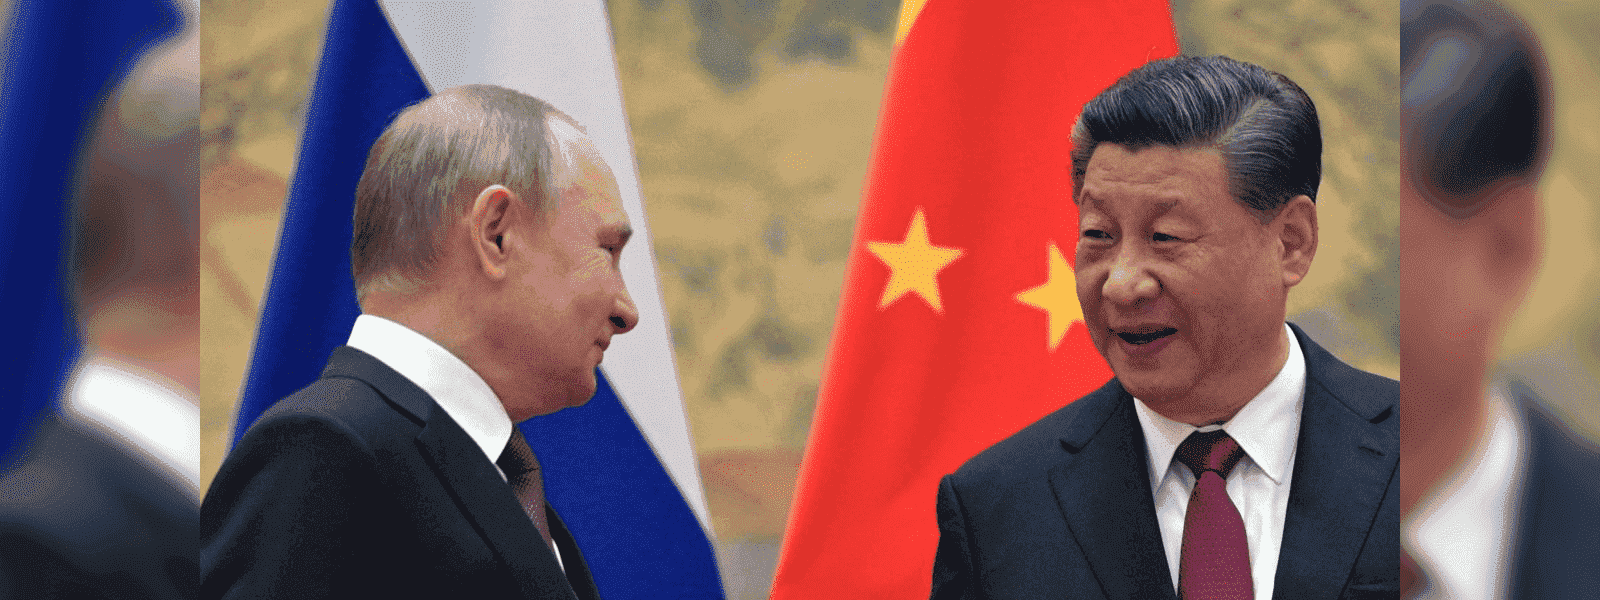 China's Xi to meet with Putin in Moscow